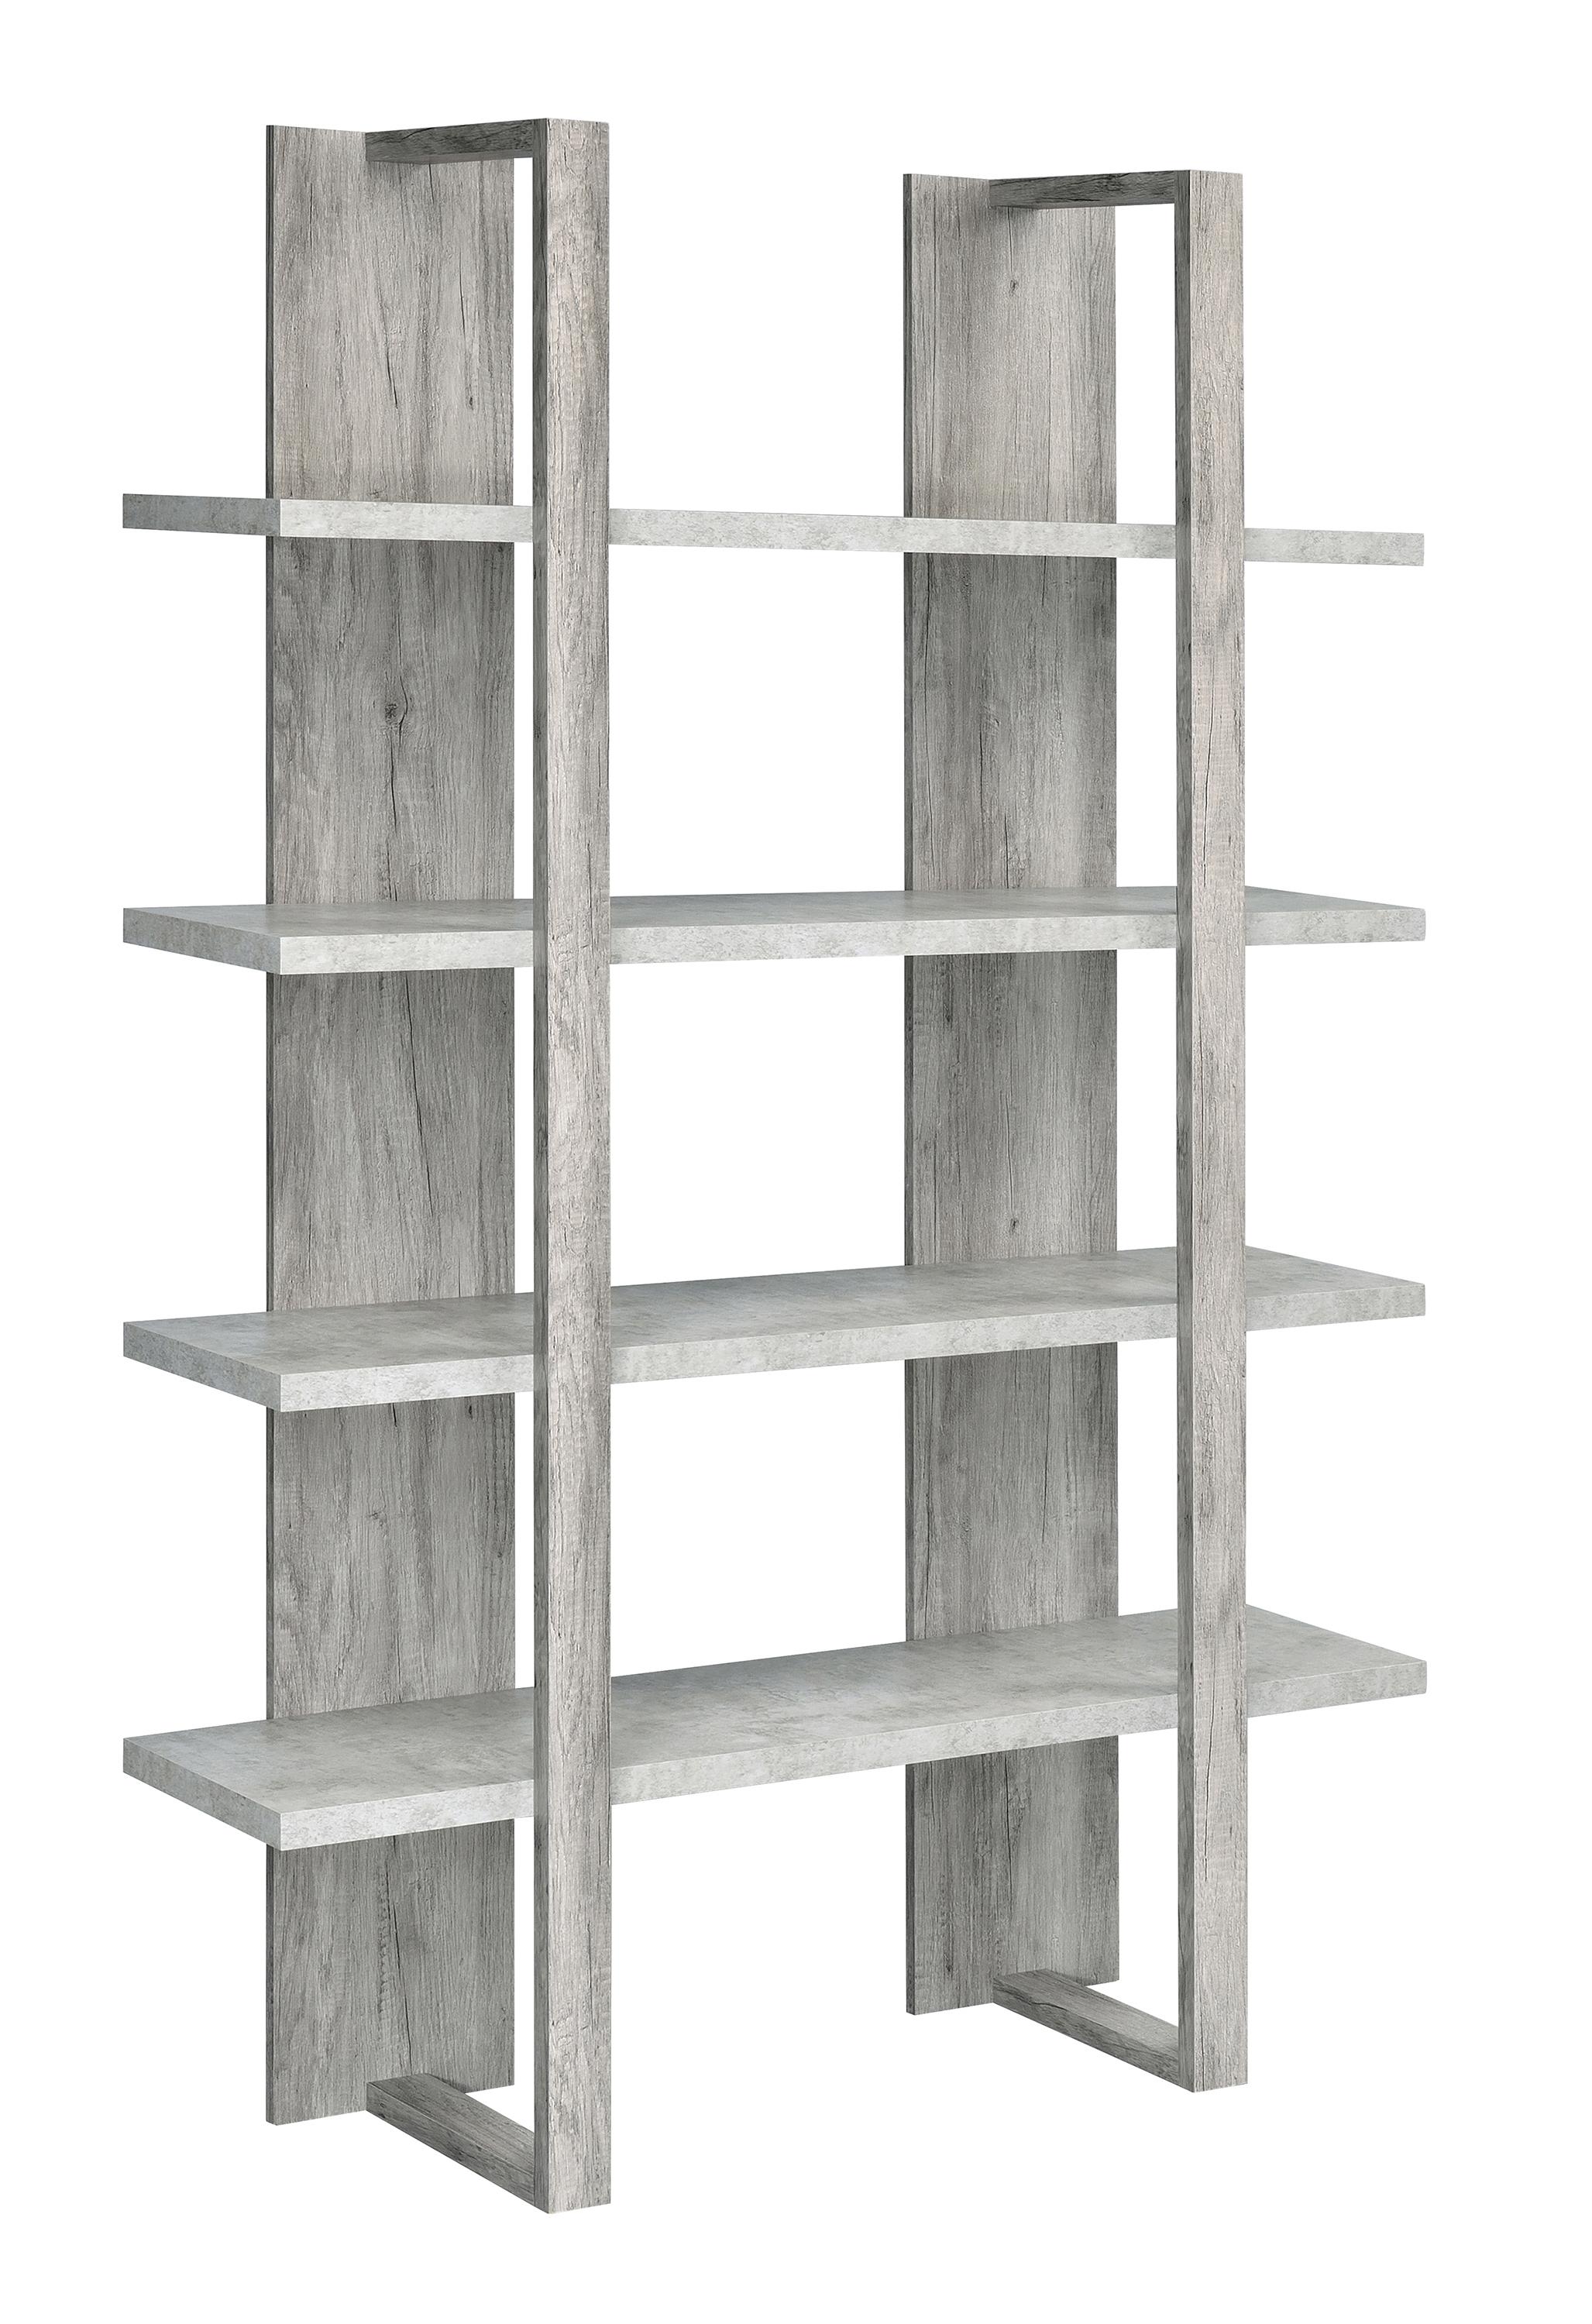 Contemporary Bookcase 882037 Danbrook 882037 in Driftwood 